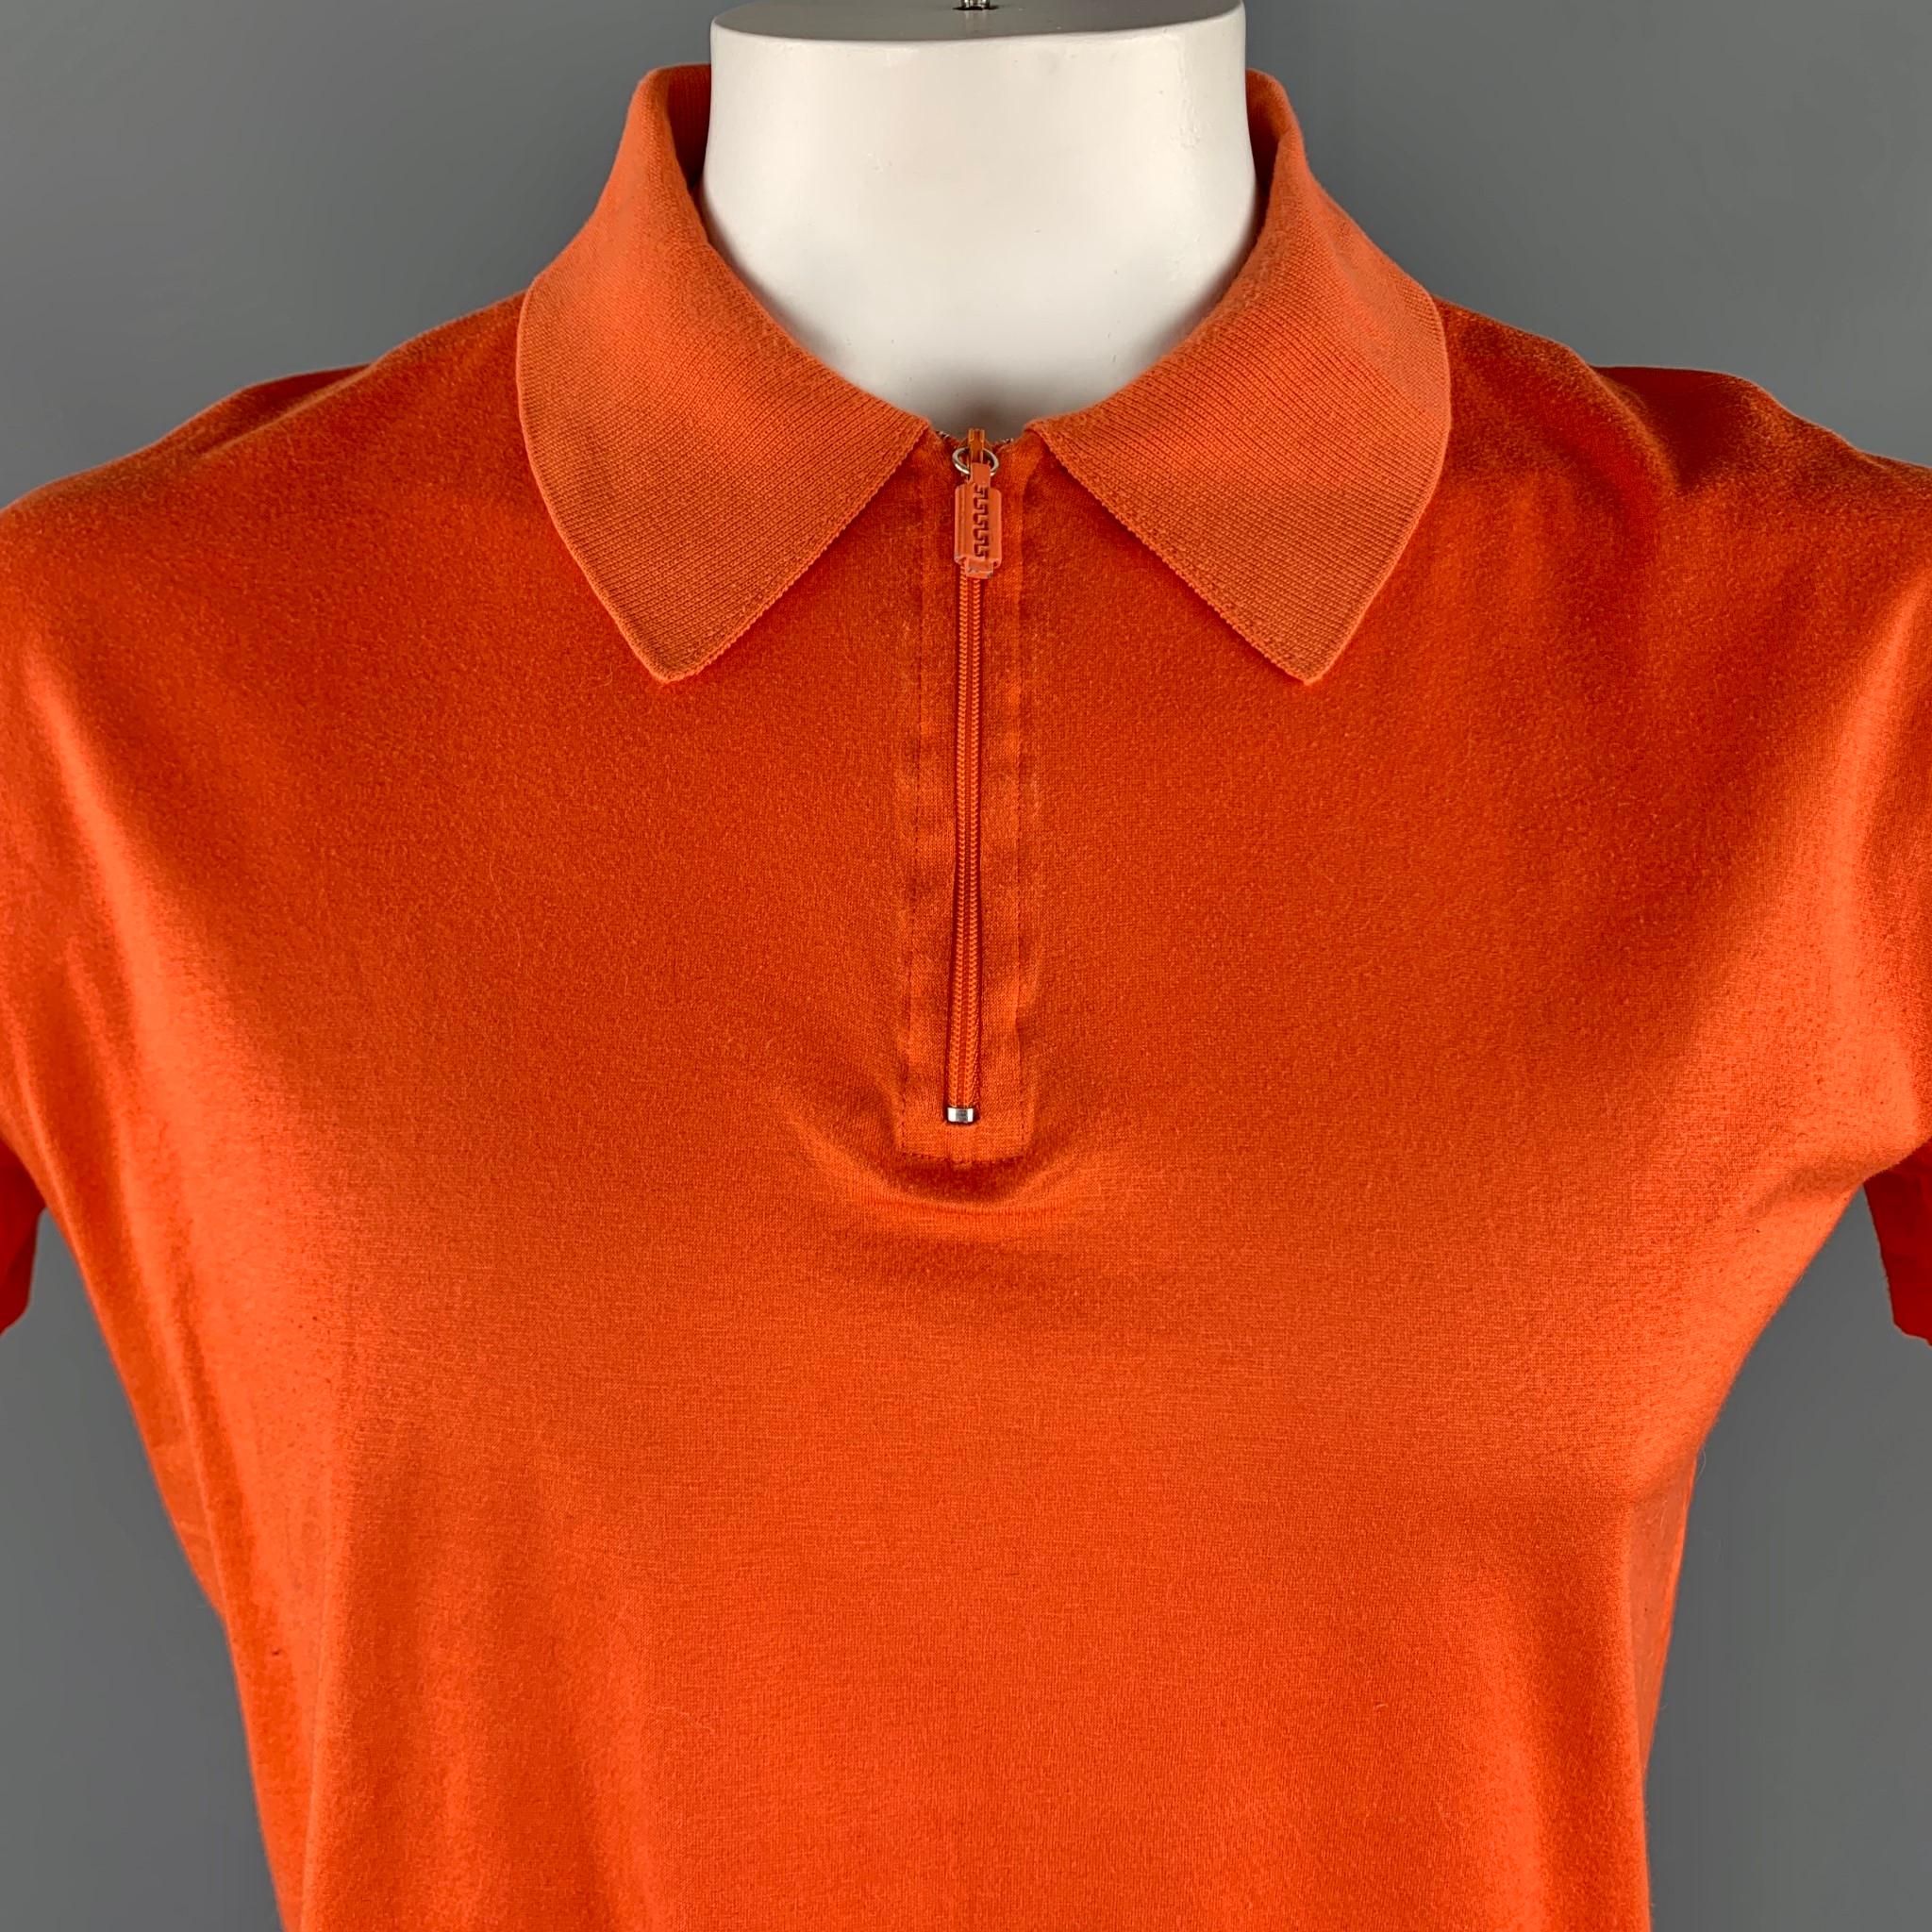 Vintage V2 by VERSACE POLO comes in a solid orange cotton material, featuring a ribbed collar and a brand embroidery at front, with a half zip closure. Made in Italy.

Excellent Good Pre-Owned Condition.
Marked: L 

Measurements:

Shoulder: 18 in.